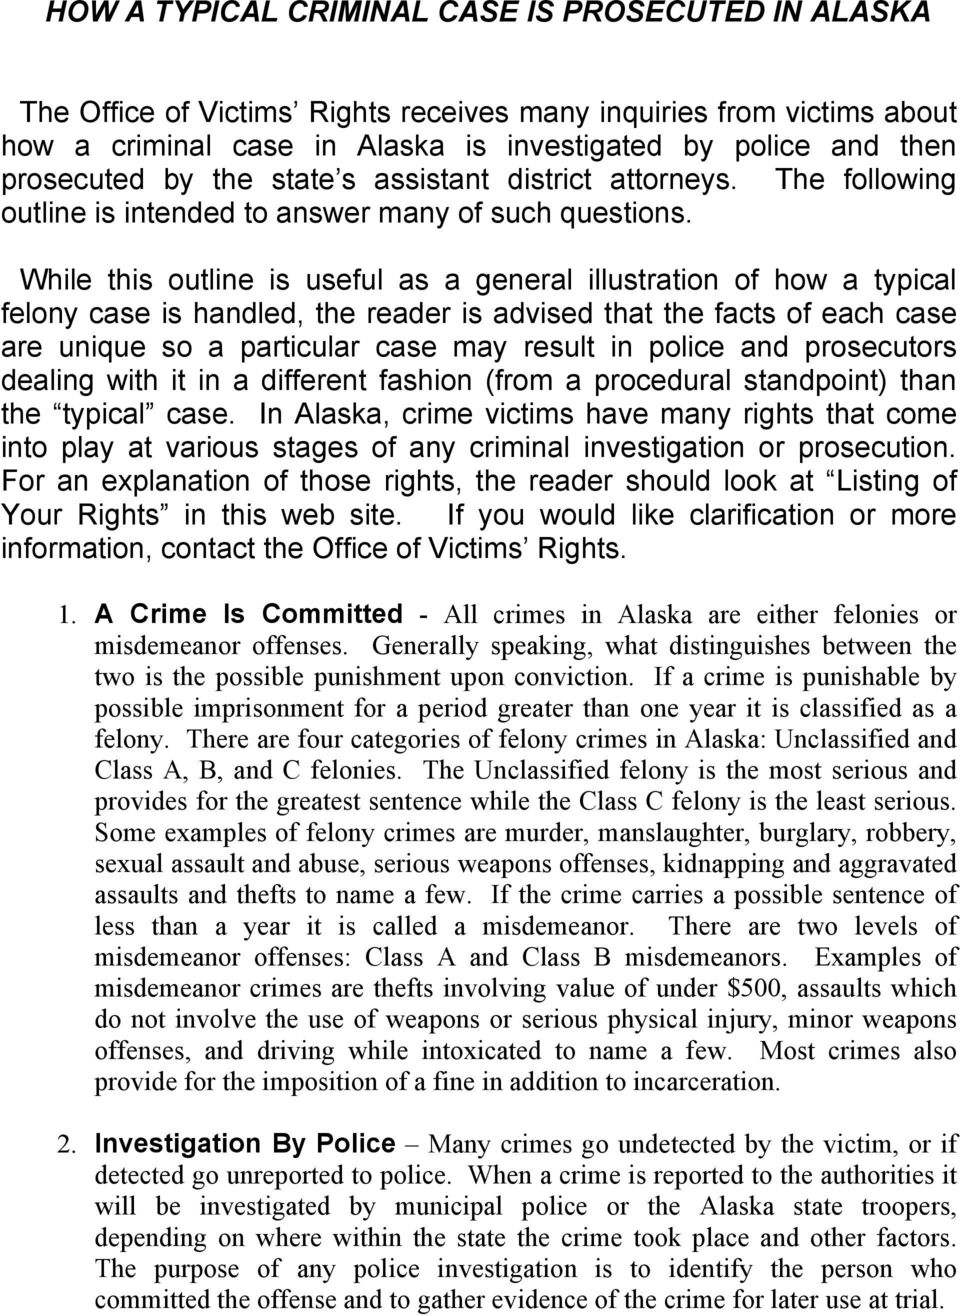 While this outline is useful as a general illustration of how a typical felony case is handled, the reader is advised that the facts of each case are unique so a particular case may result in police